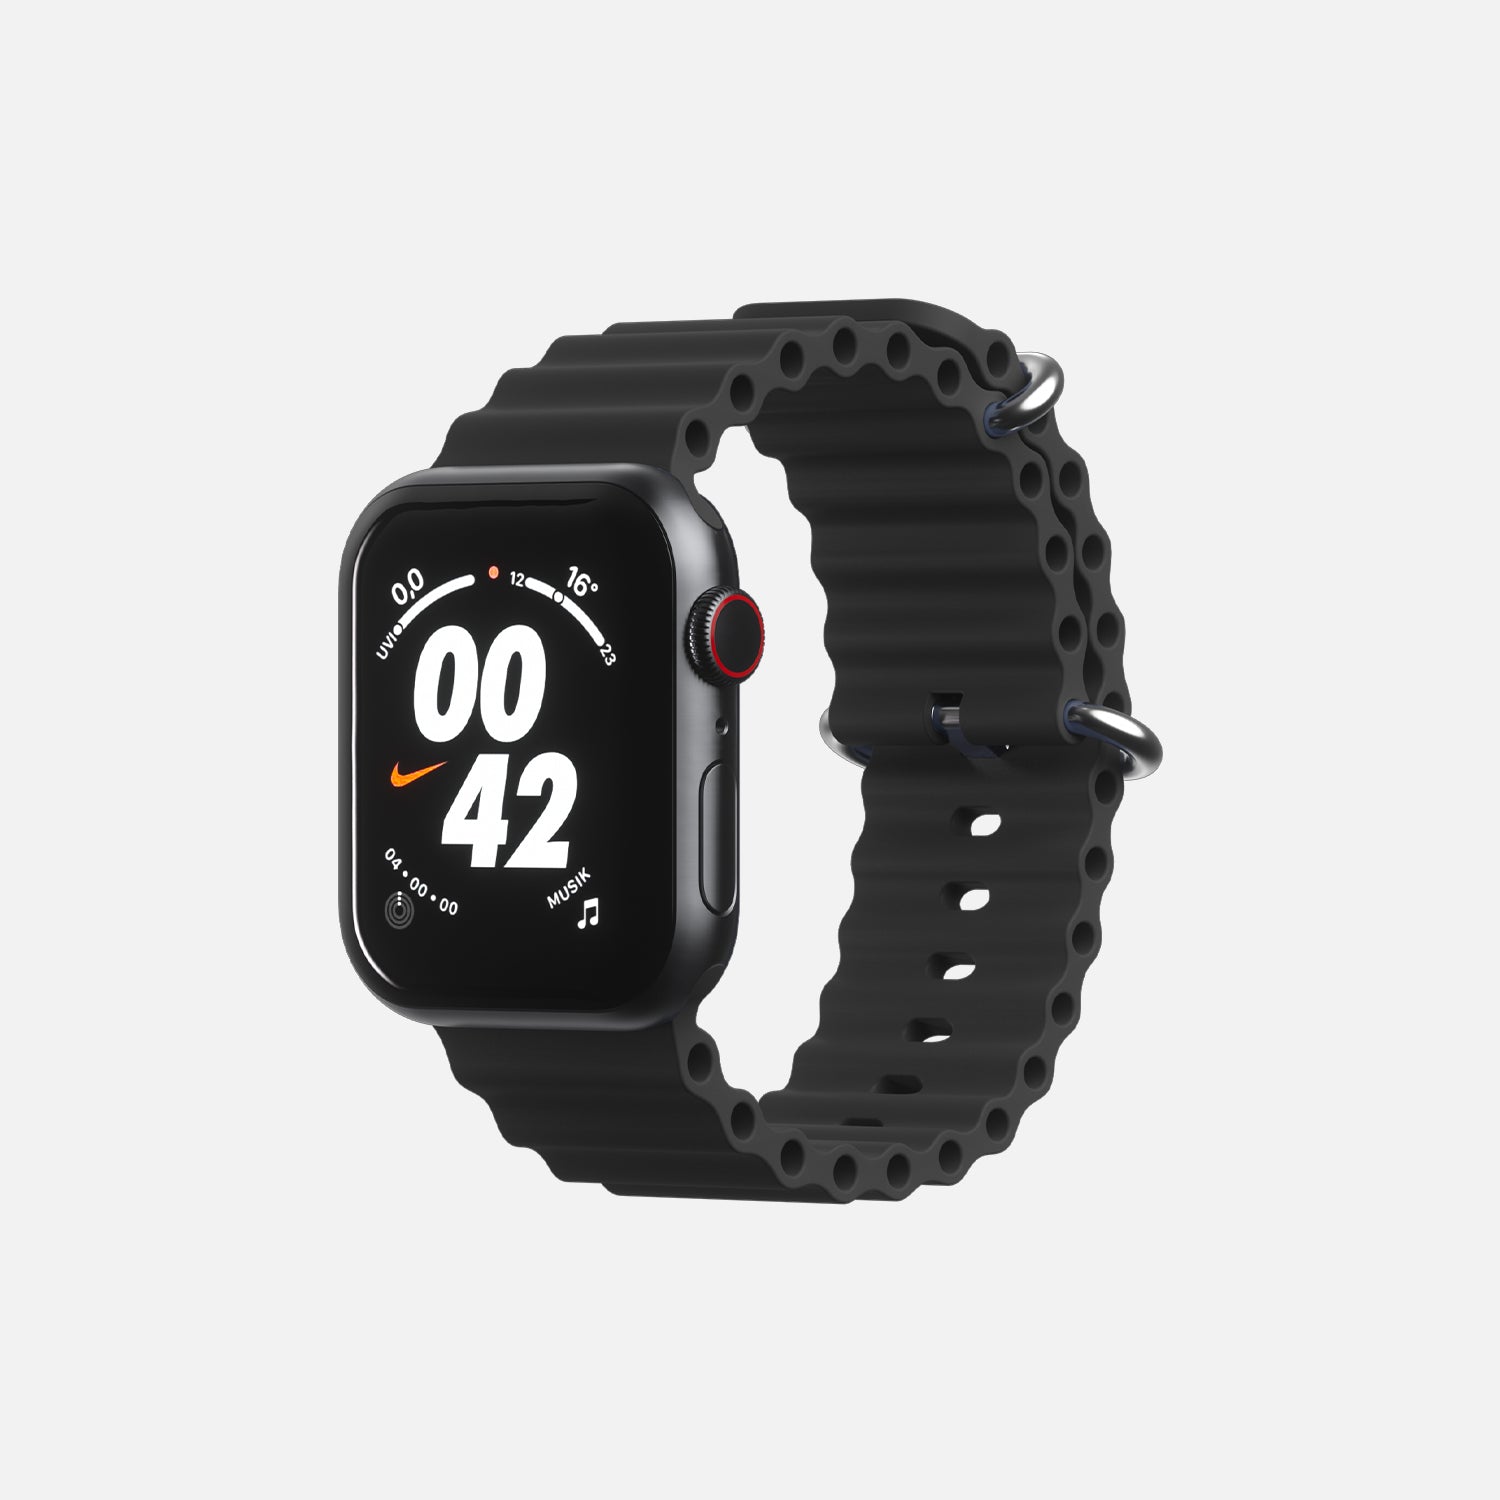 Black Apple smartwatch with sport band and digital display showing time and Nike logo.